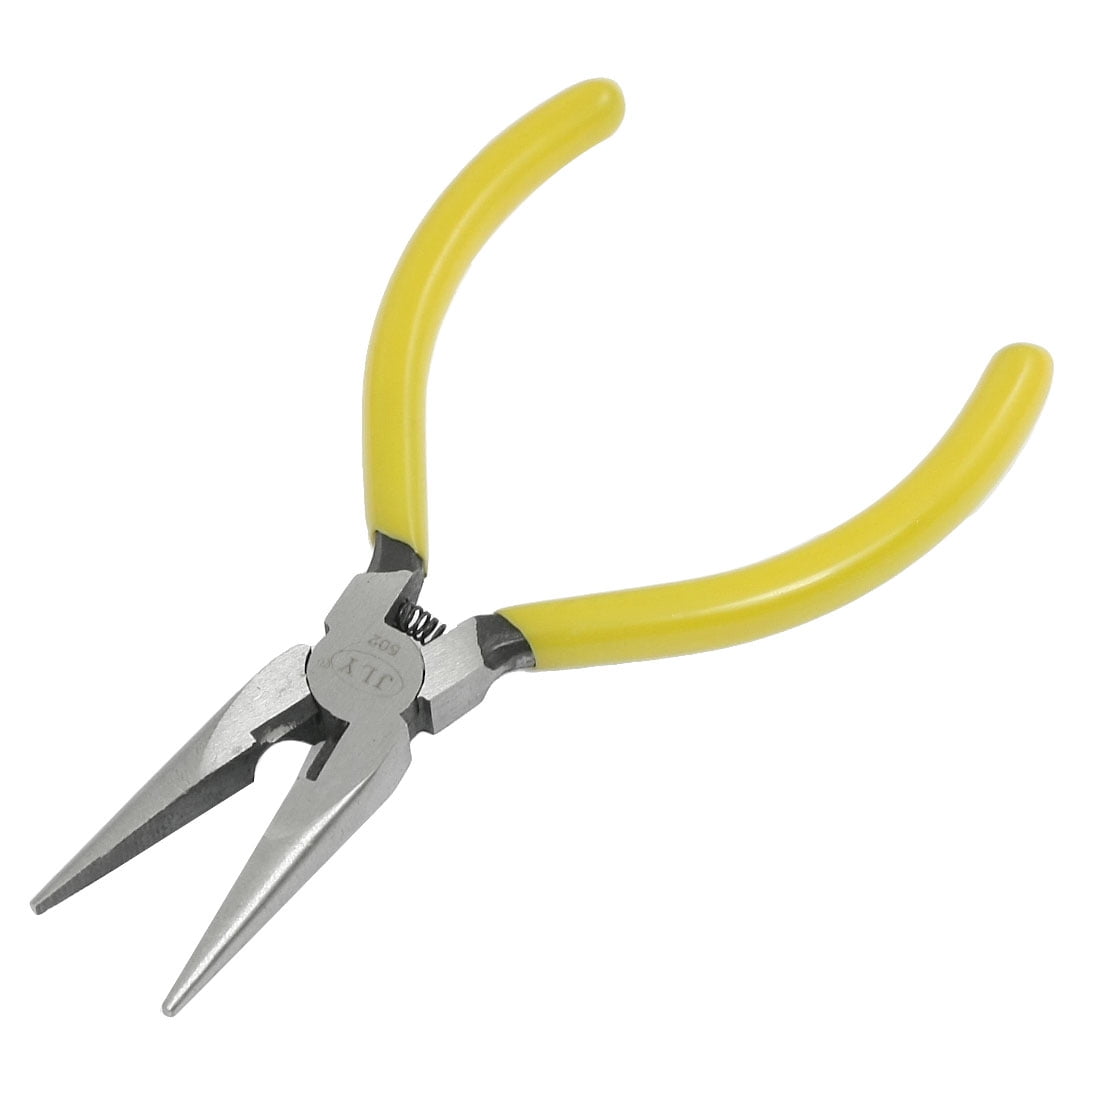 Unique Bargains Plastic Coated Handle Long Needle Nose Pliers Electrical Repair Tool 6 Length Other